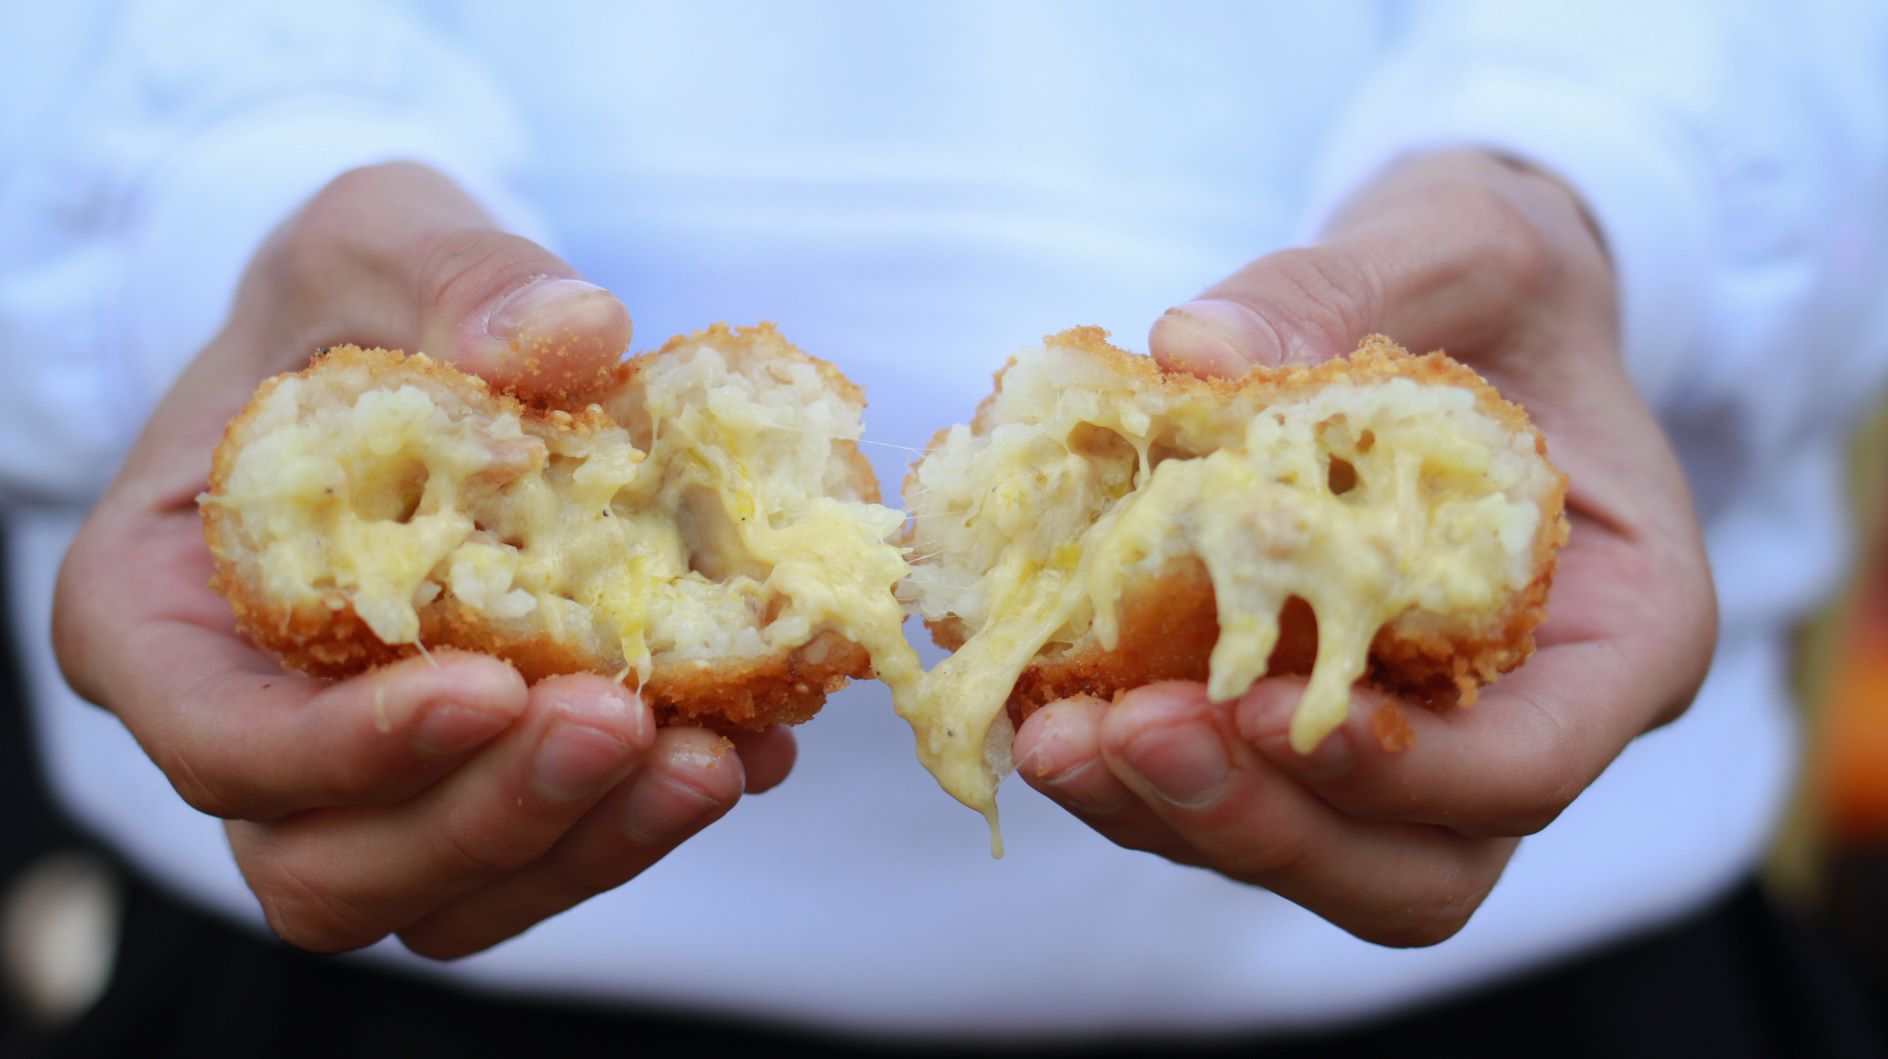 an arancini ball being pulled apart, cheesy filling oozing out